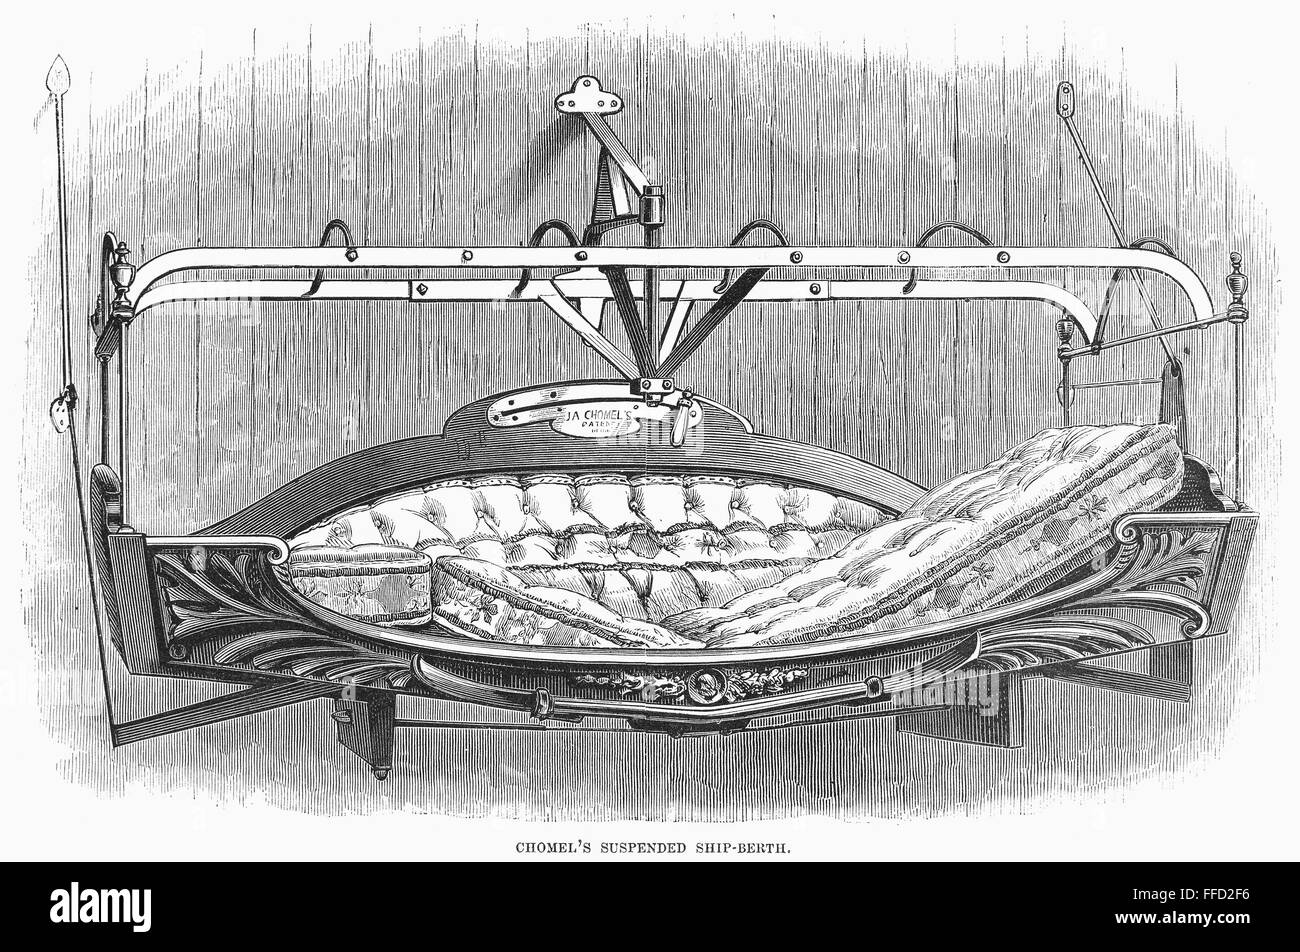 PASSENGER BERTH, 1874. /nA patented berth for first class steamship passengers. Wood engraving, American, 1874. Stock Photo